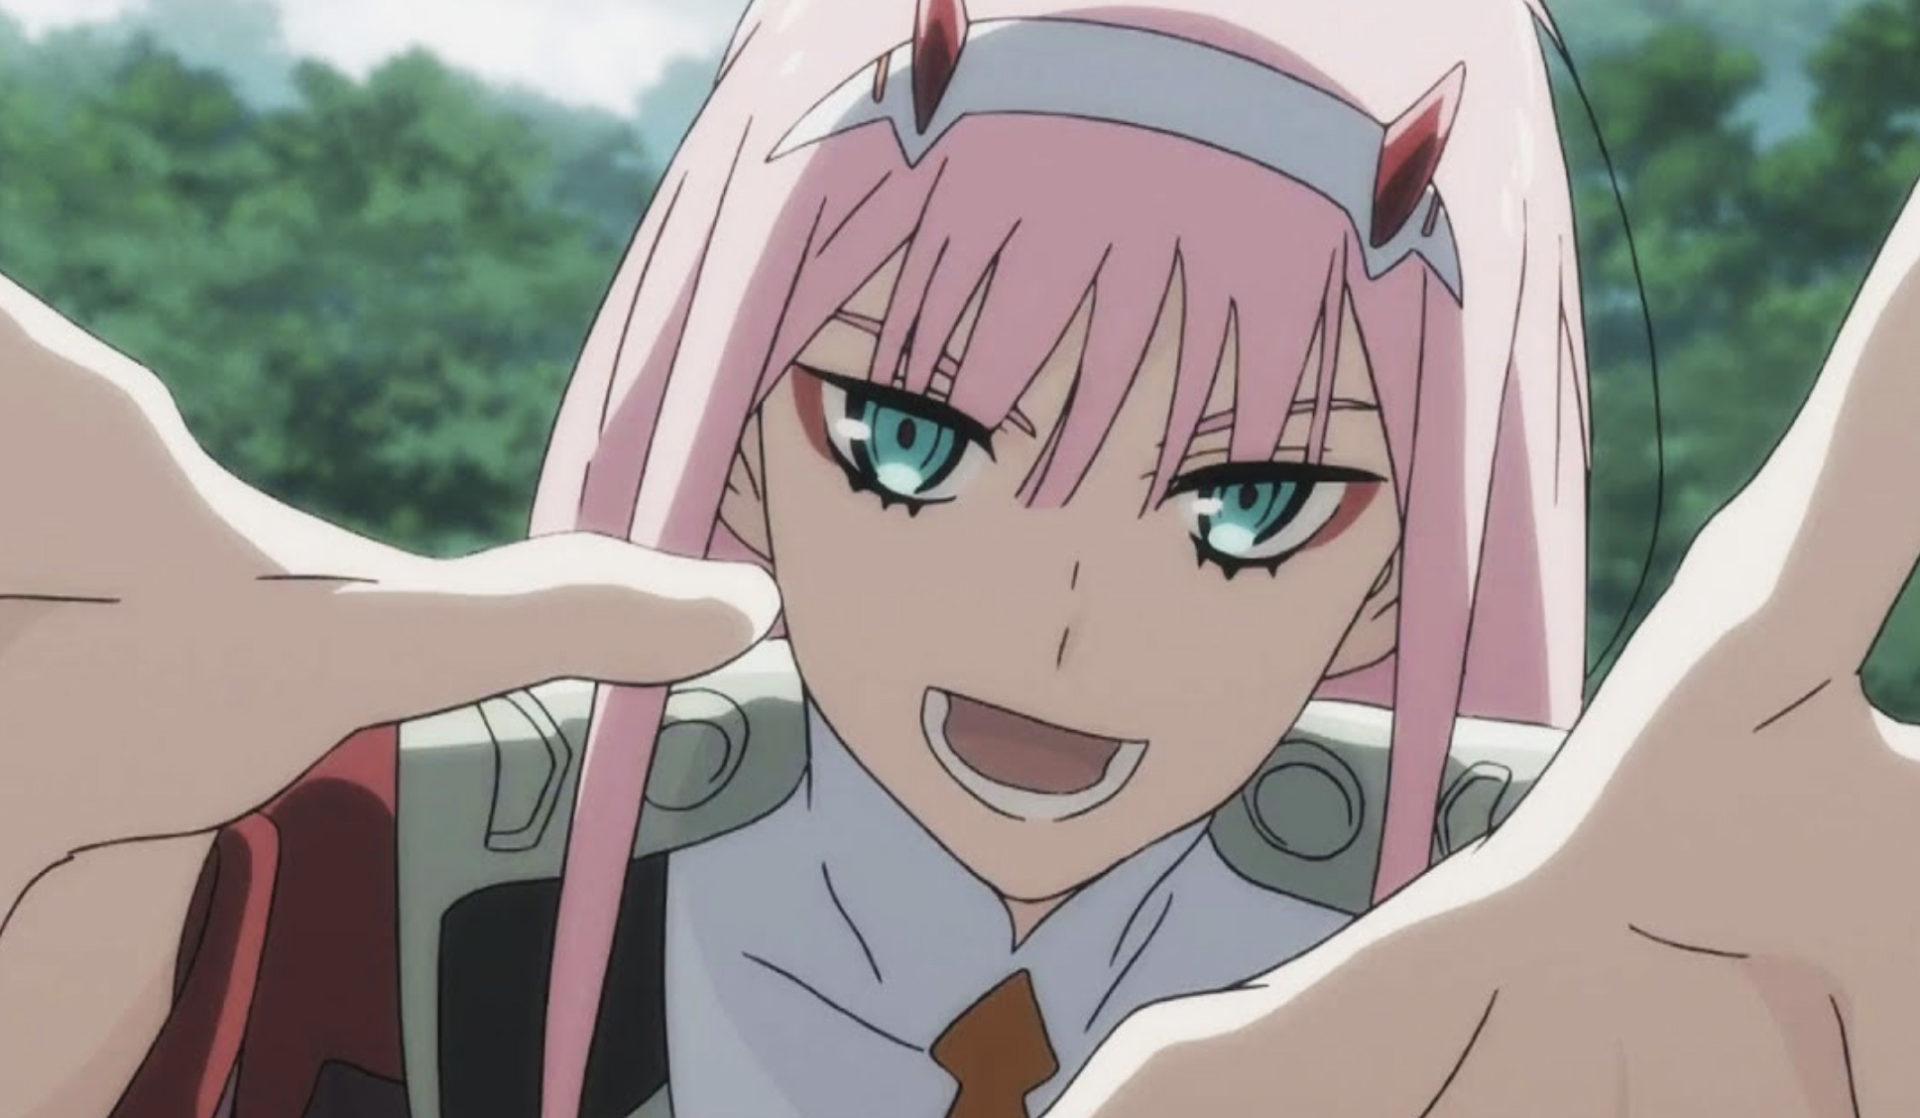 Screenshot of Darling in the Franxx anime protagonist Zero Two.